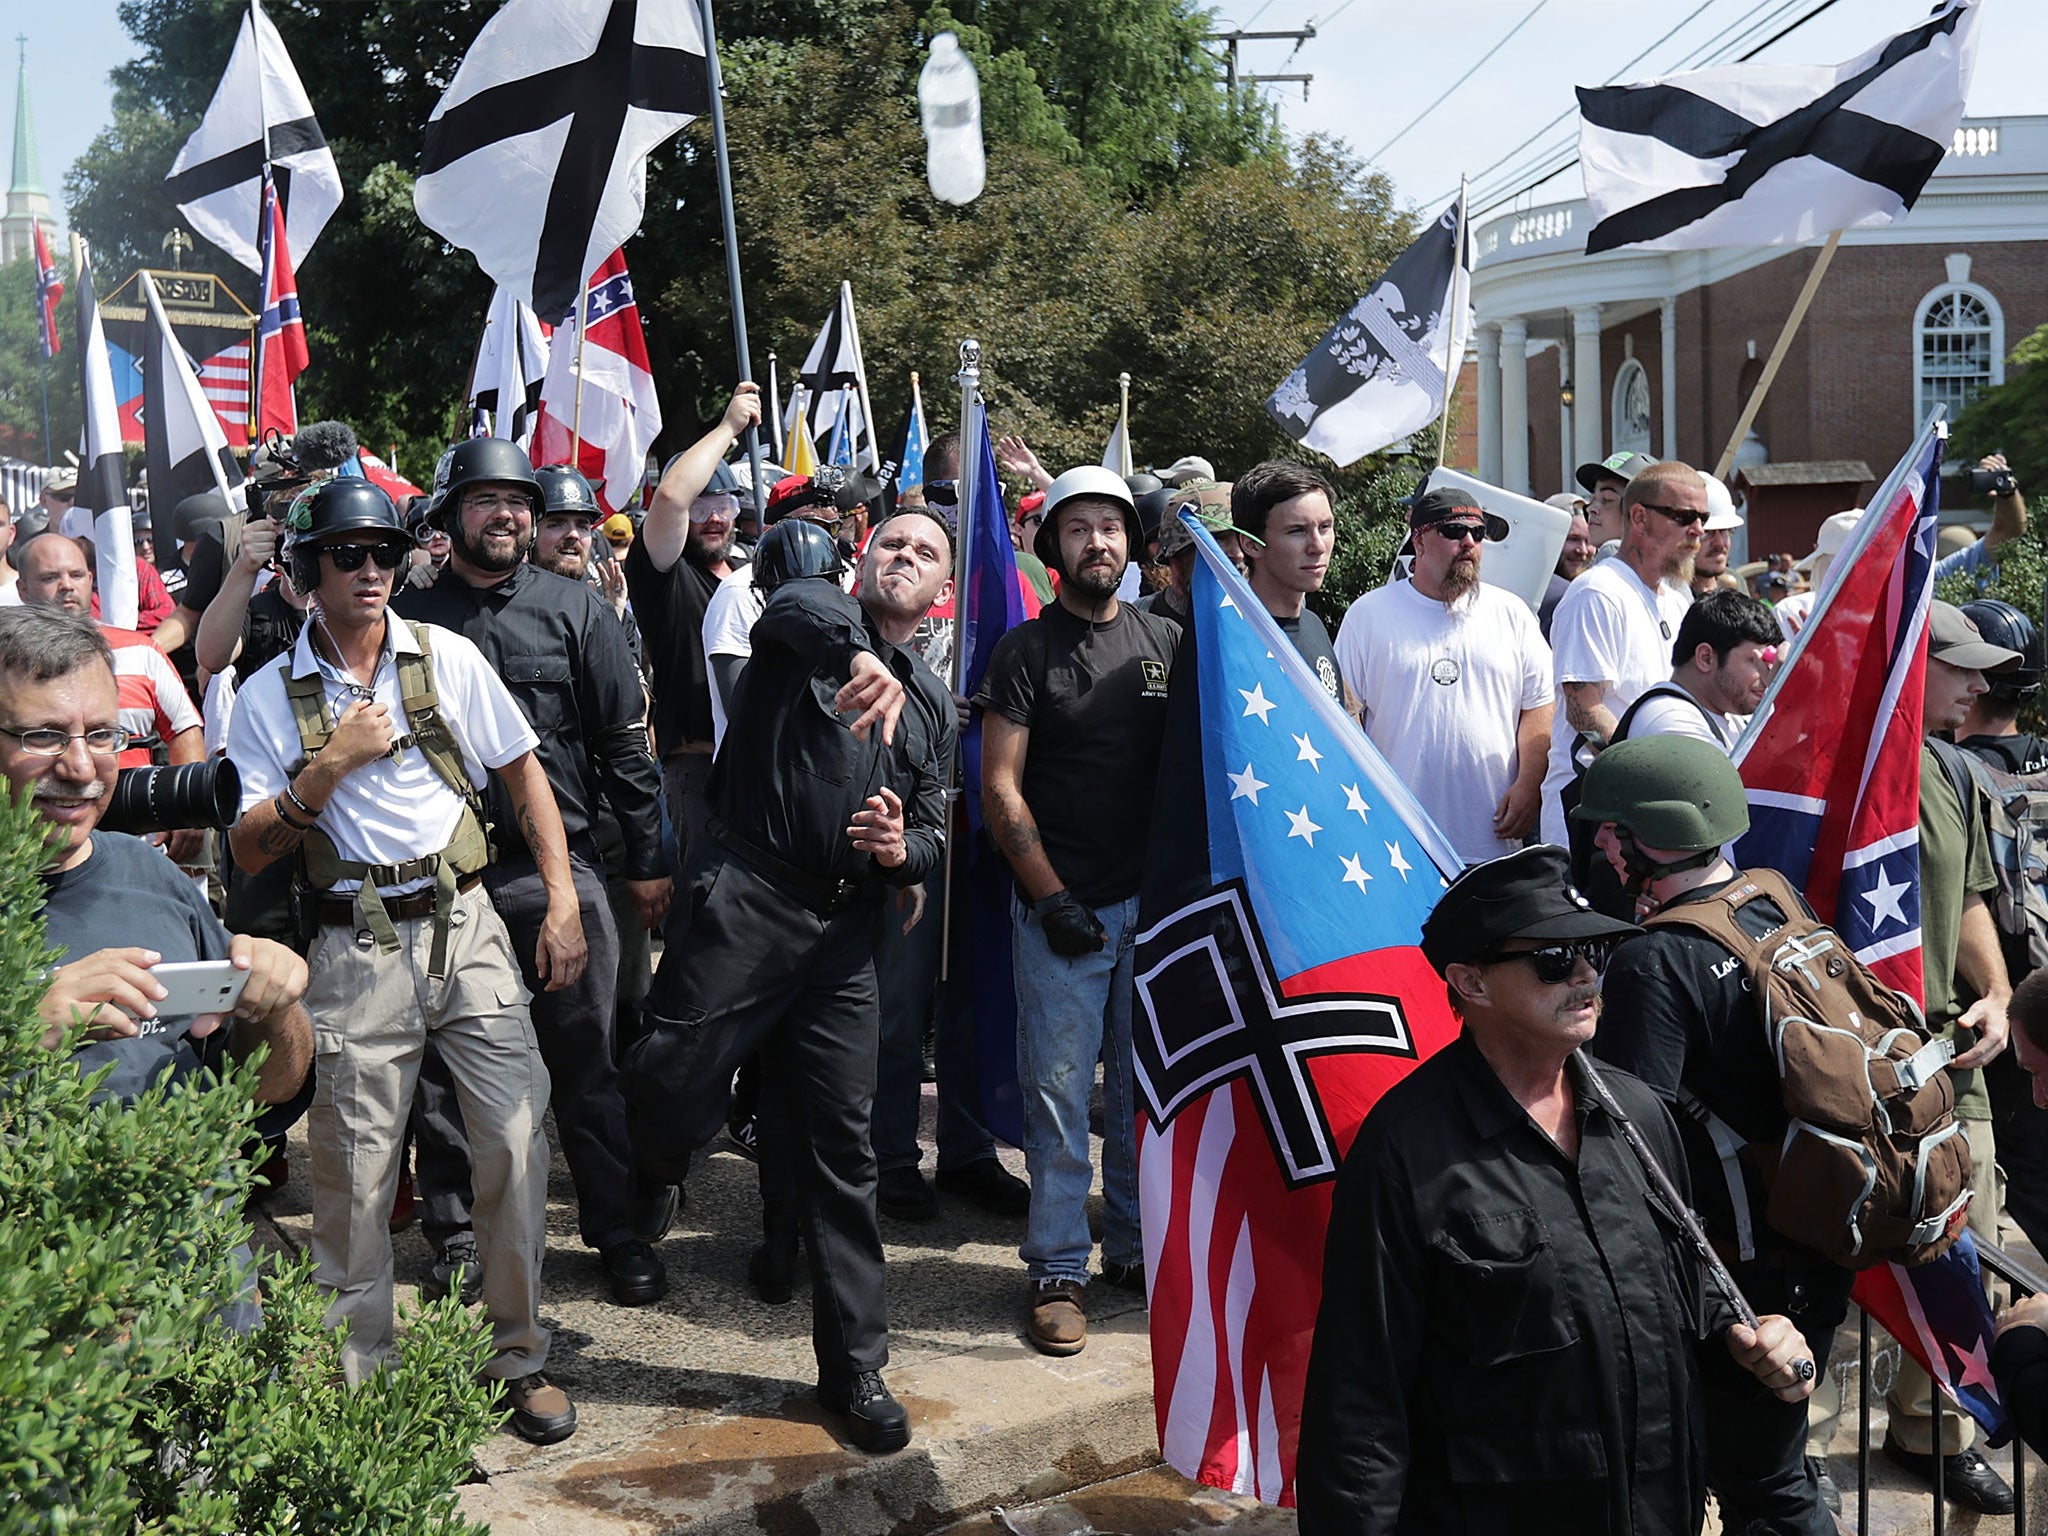 The event is being organised by white supremacist group behind last summer's rally in Charlottesville 